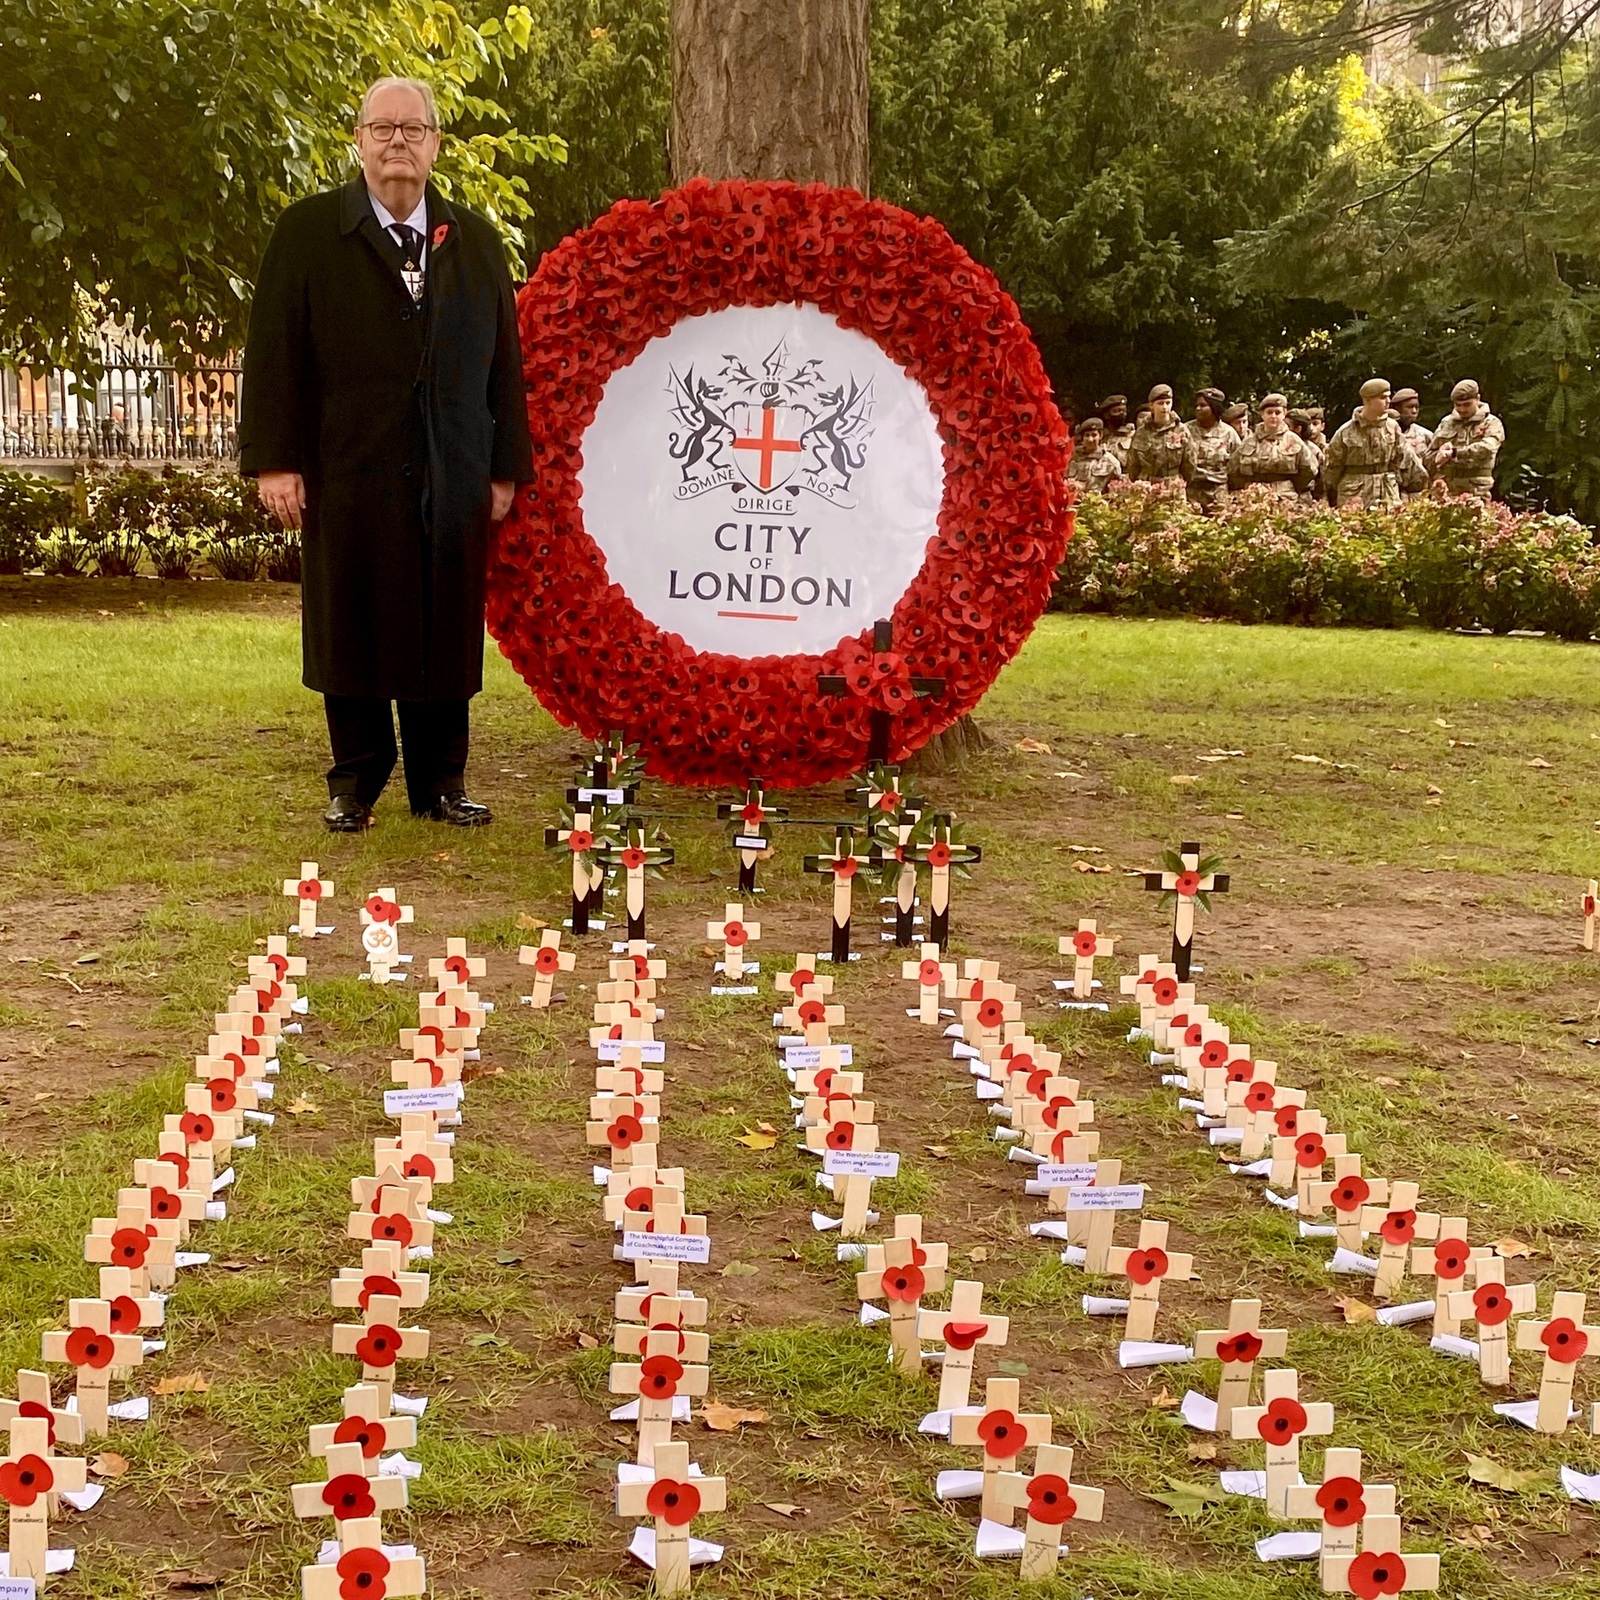 Placing a cross within the Garden of Remembrance at St Paul’s on behalf of the Marketors